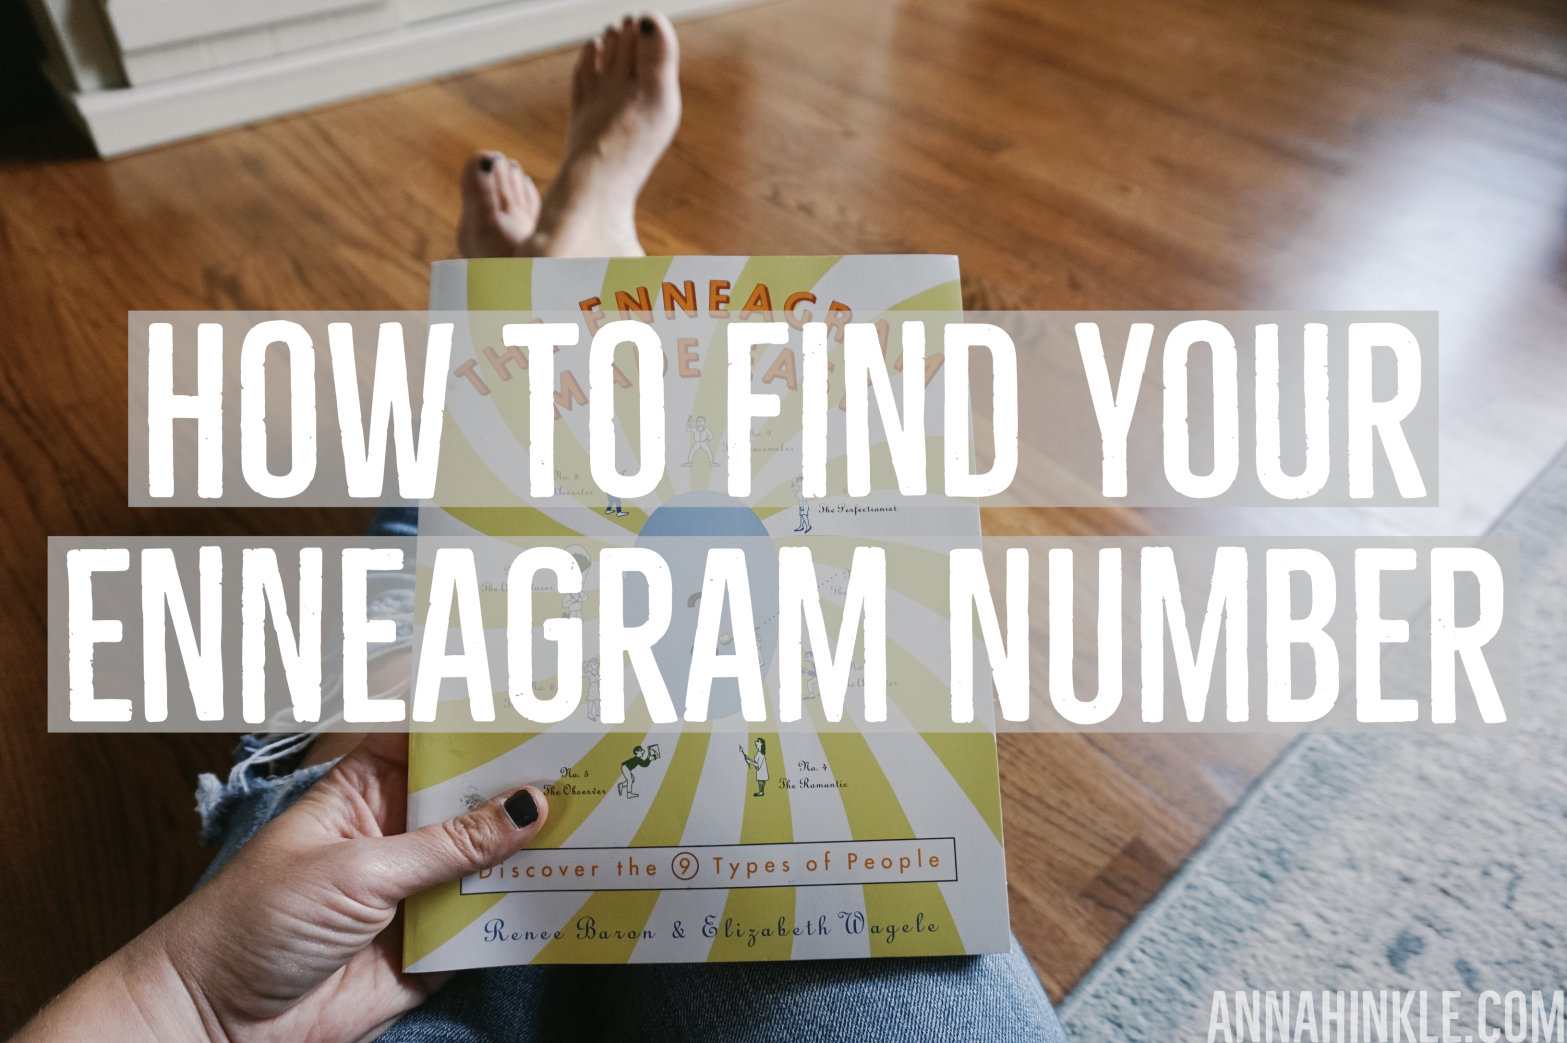 How to Find Your Enneagram Number